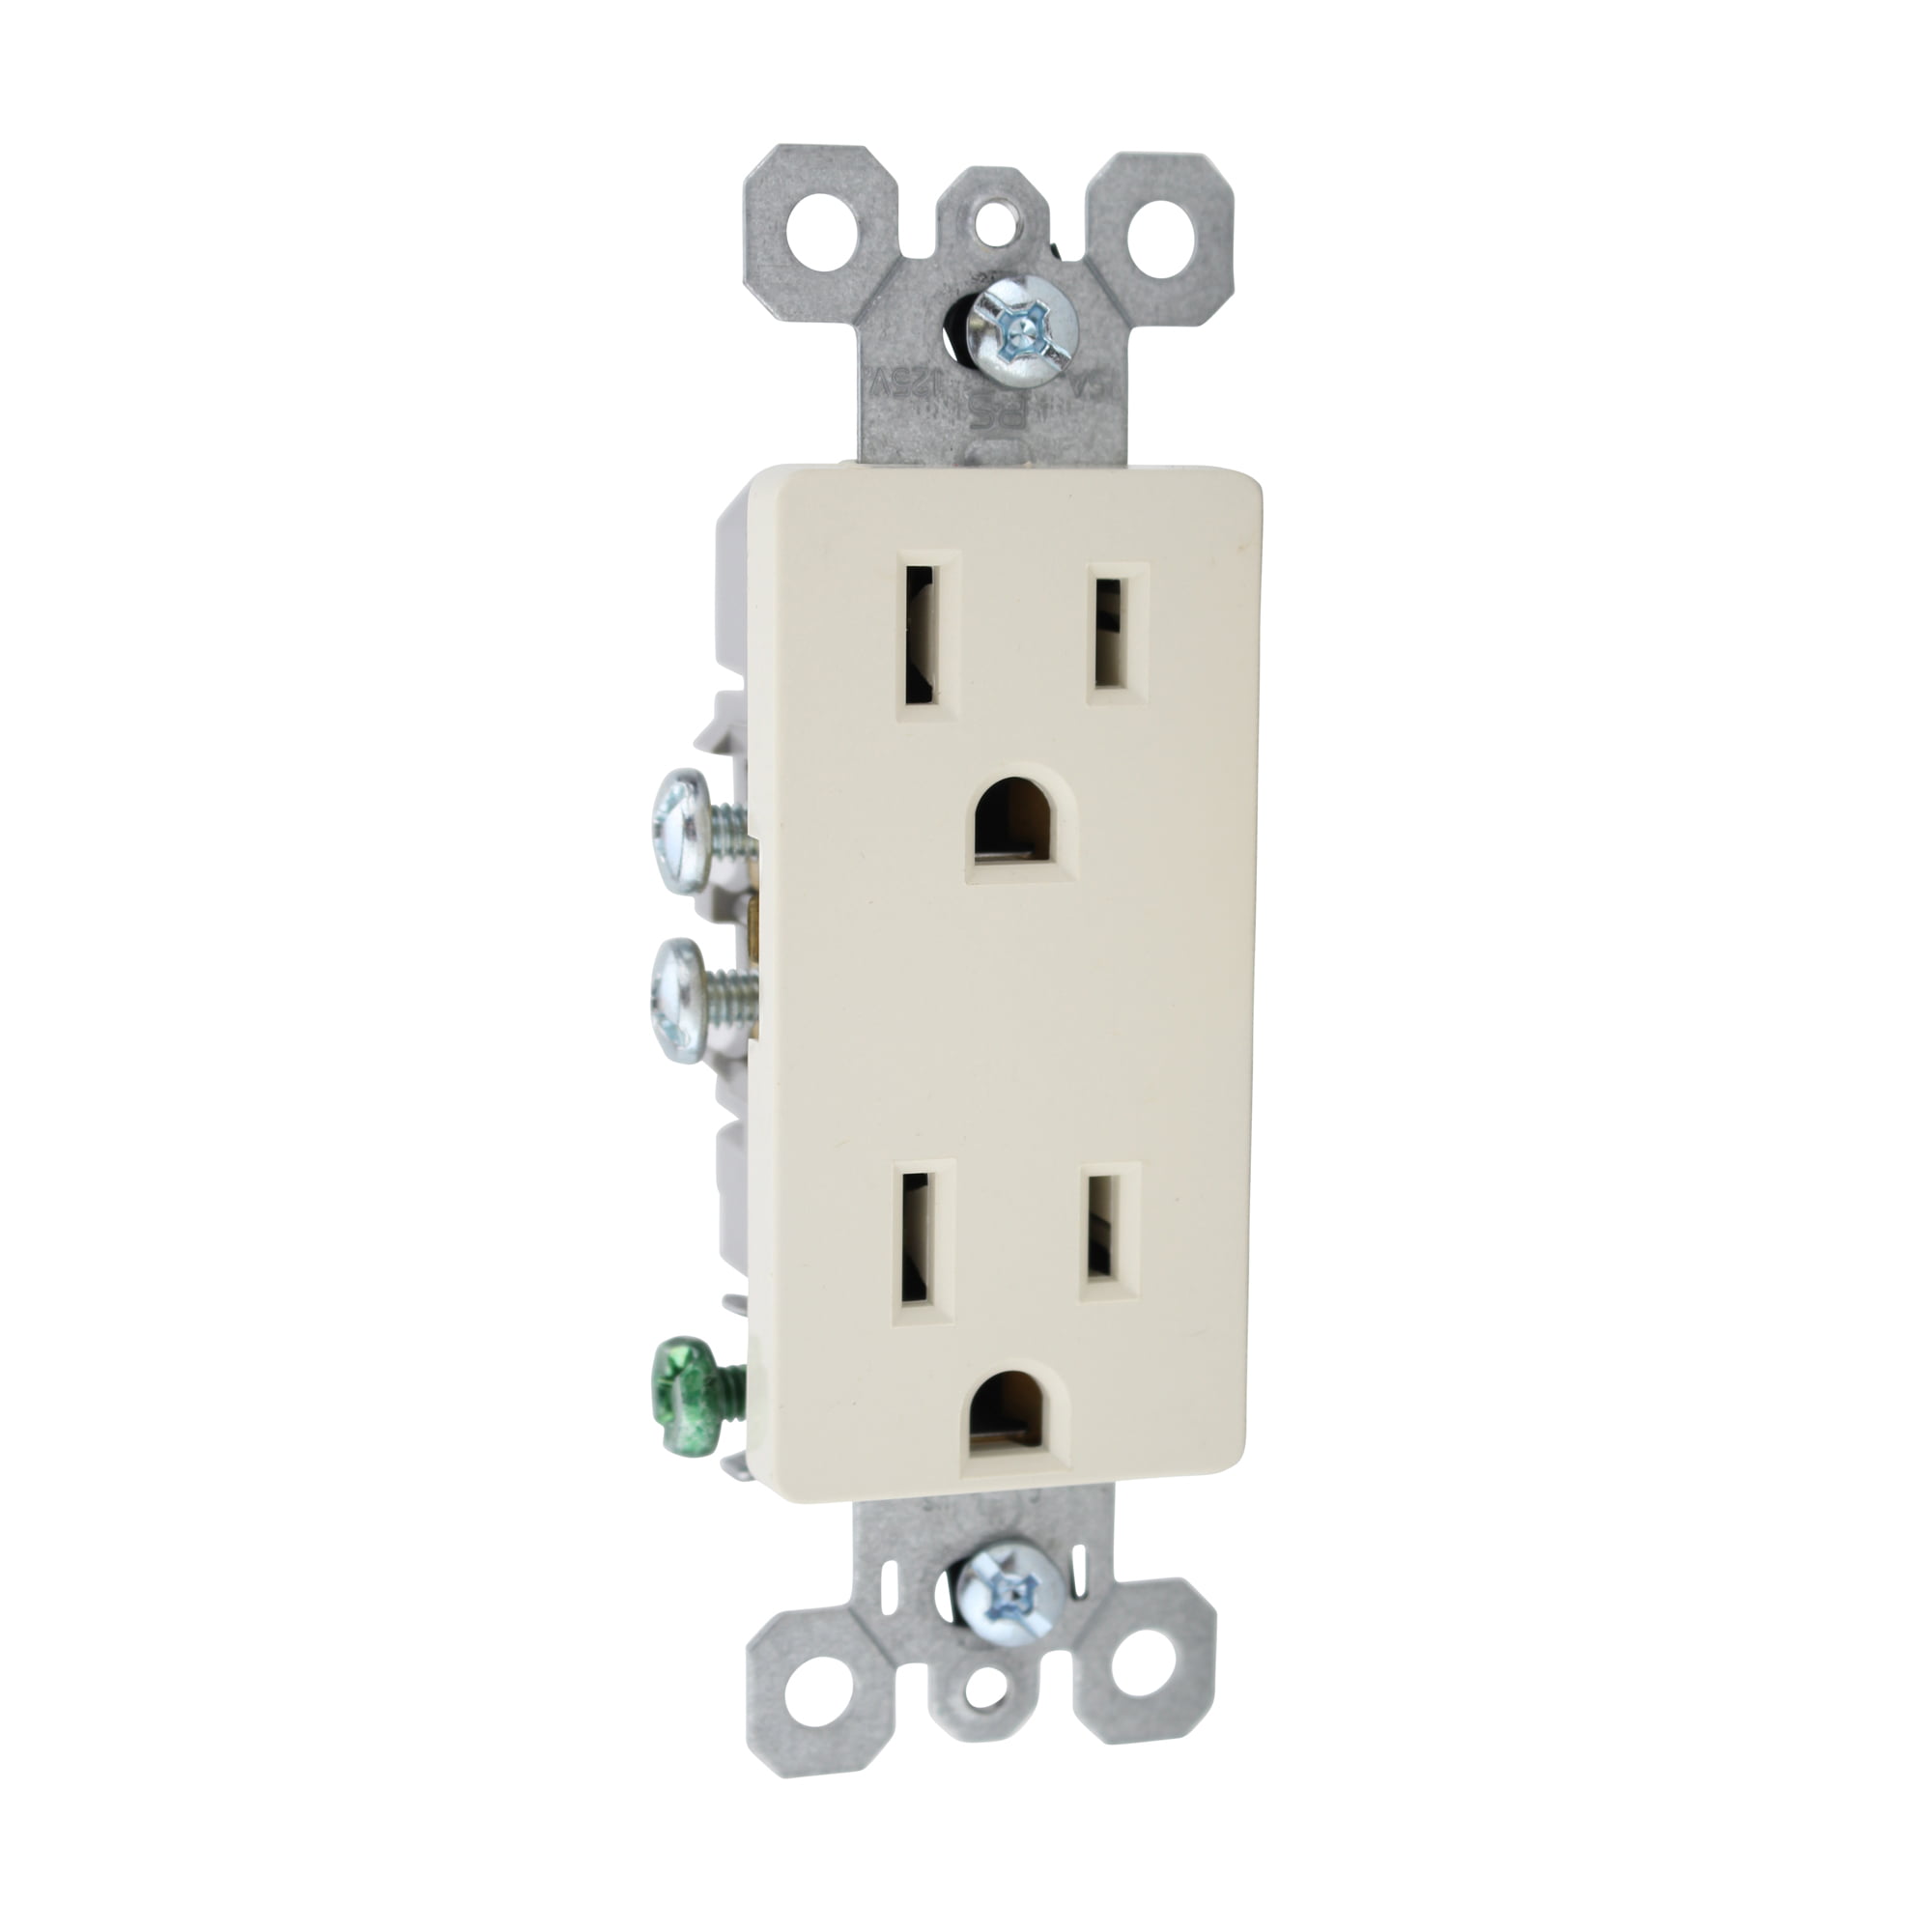 PASS & SEYMOUR LEGRAND 885-I DECORATOR RECEPTACLE 10 PACK IVORY 125V 15A 